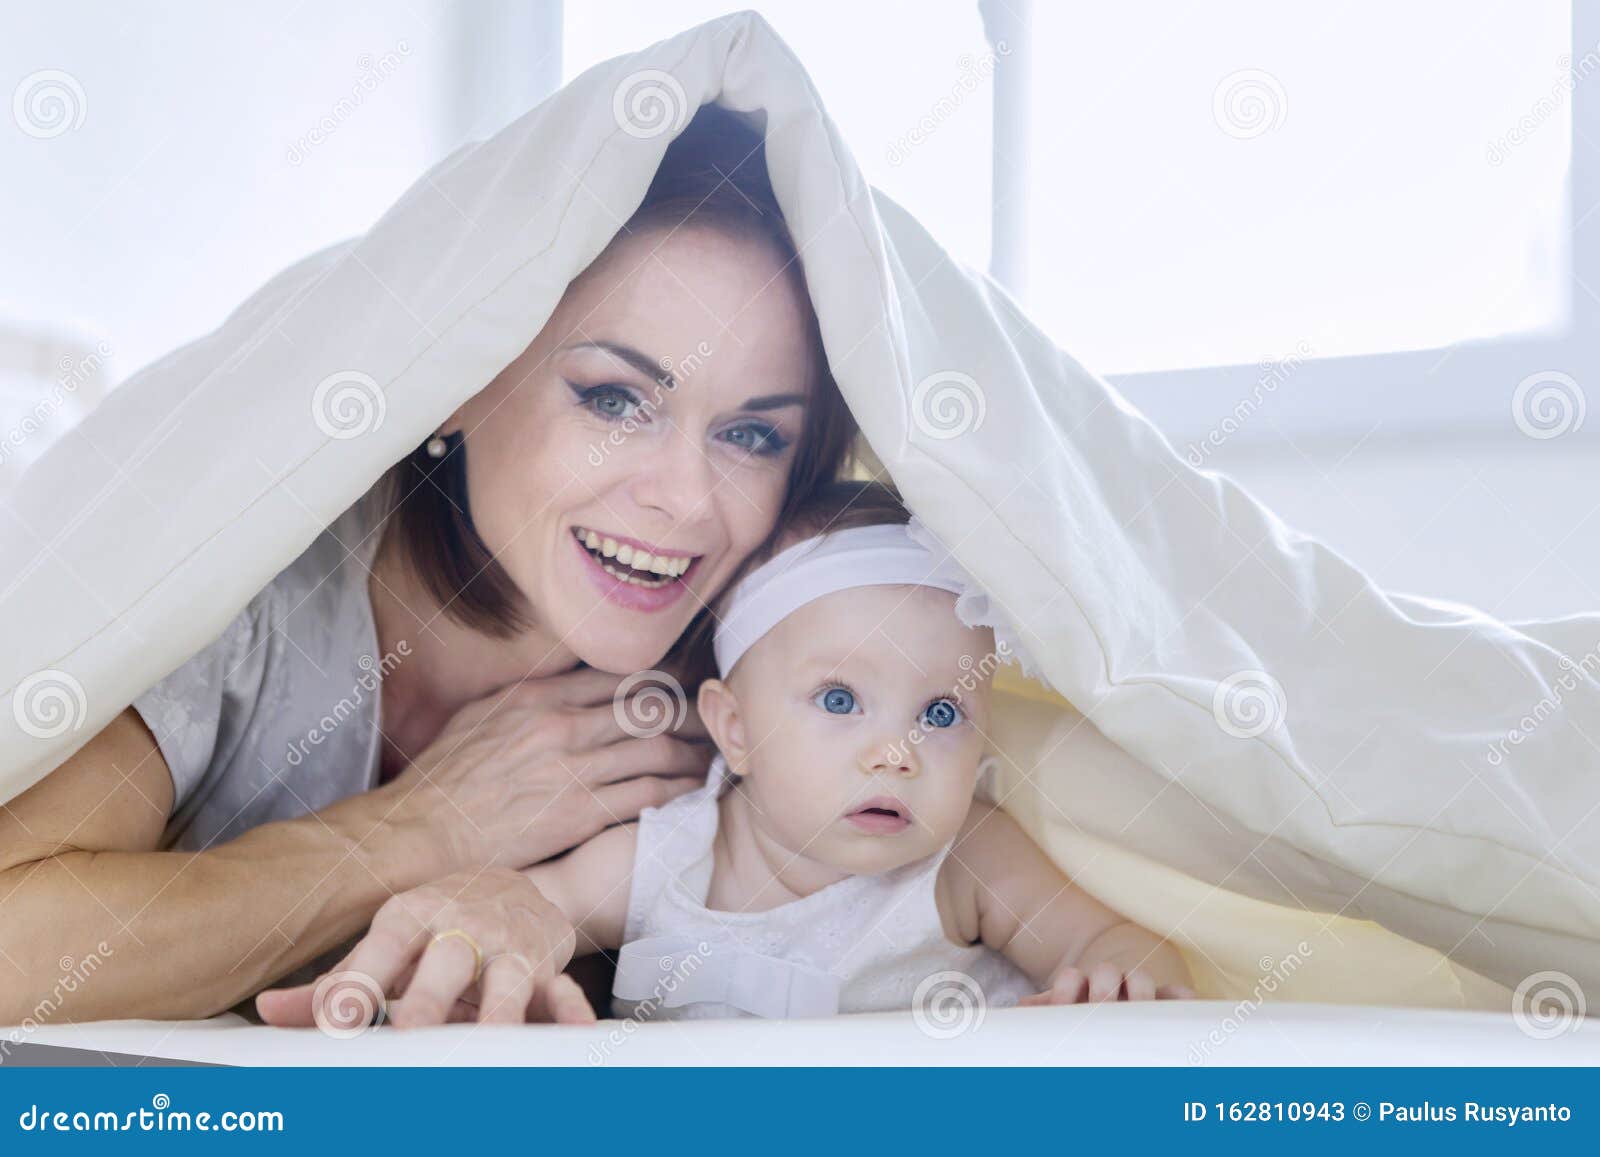 Cheerful Mother Plays with Her Baby Under a Blanket Stock Image - Image ...